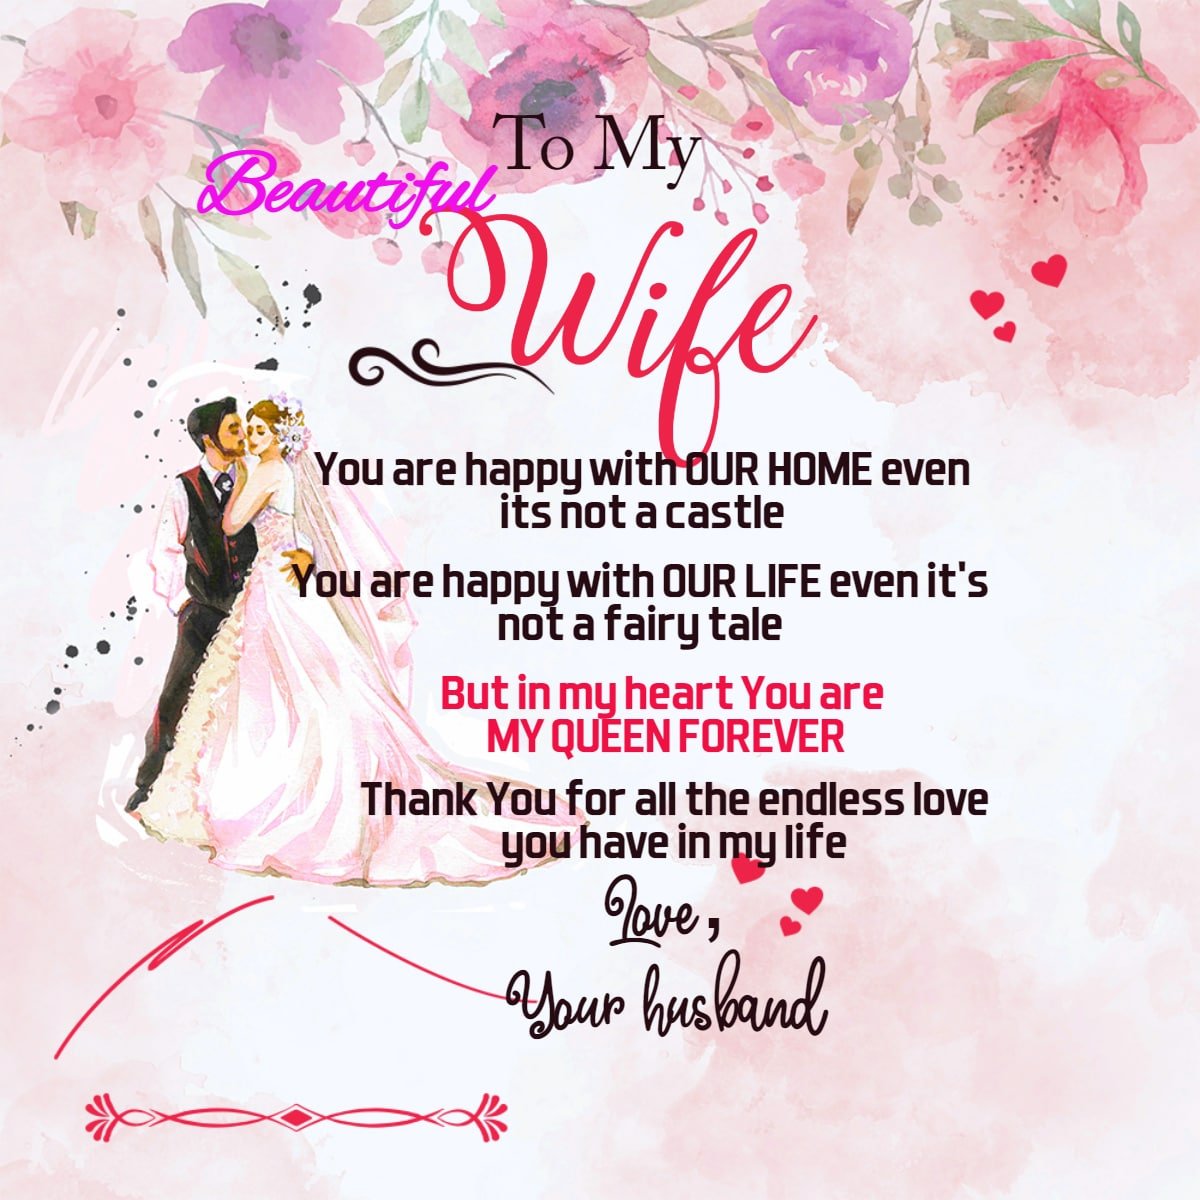 To my wife, you are my queen forever ... - Real Gifts Of Love